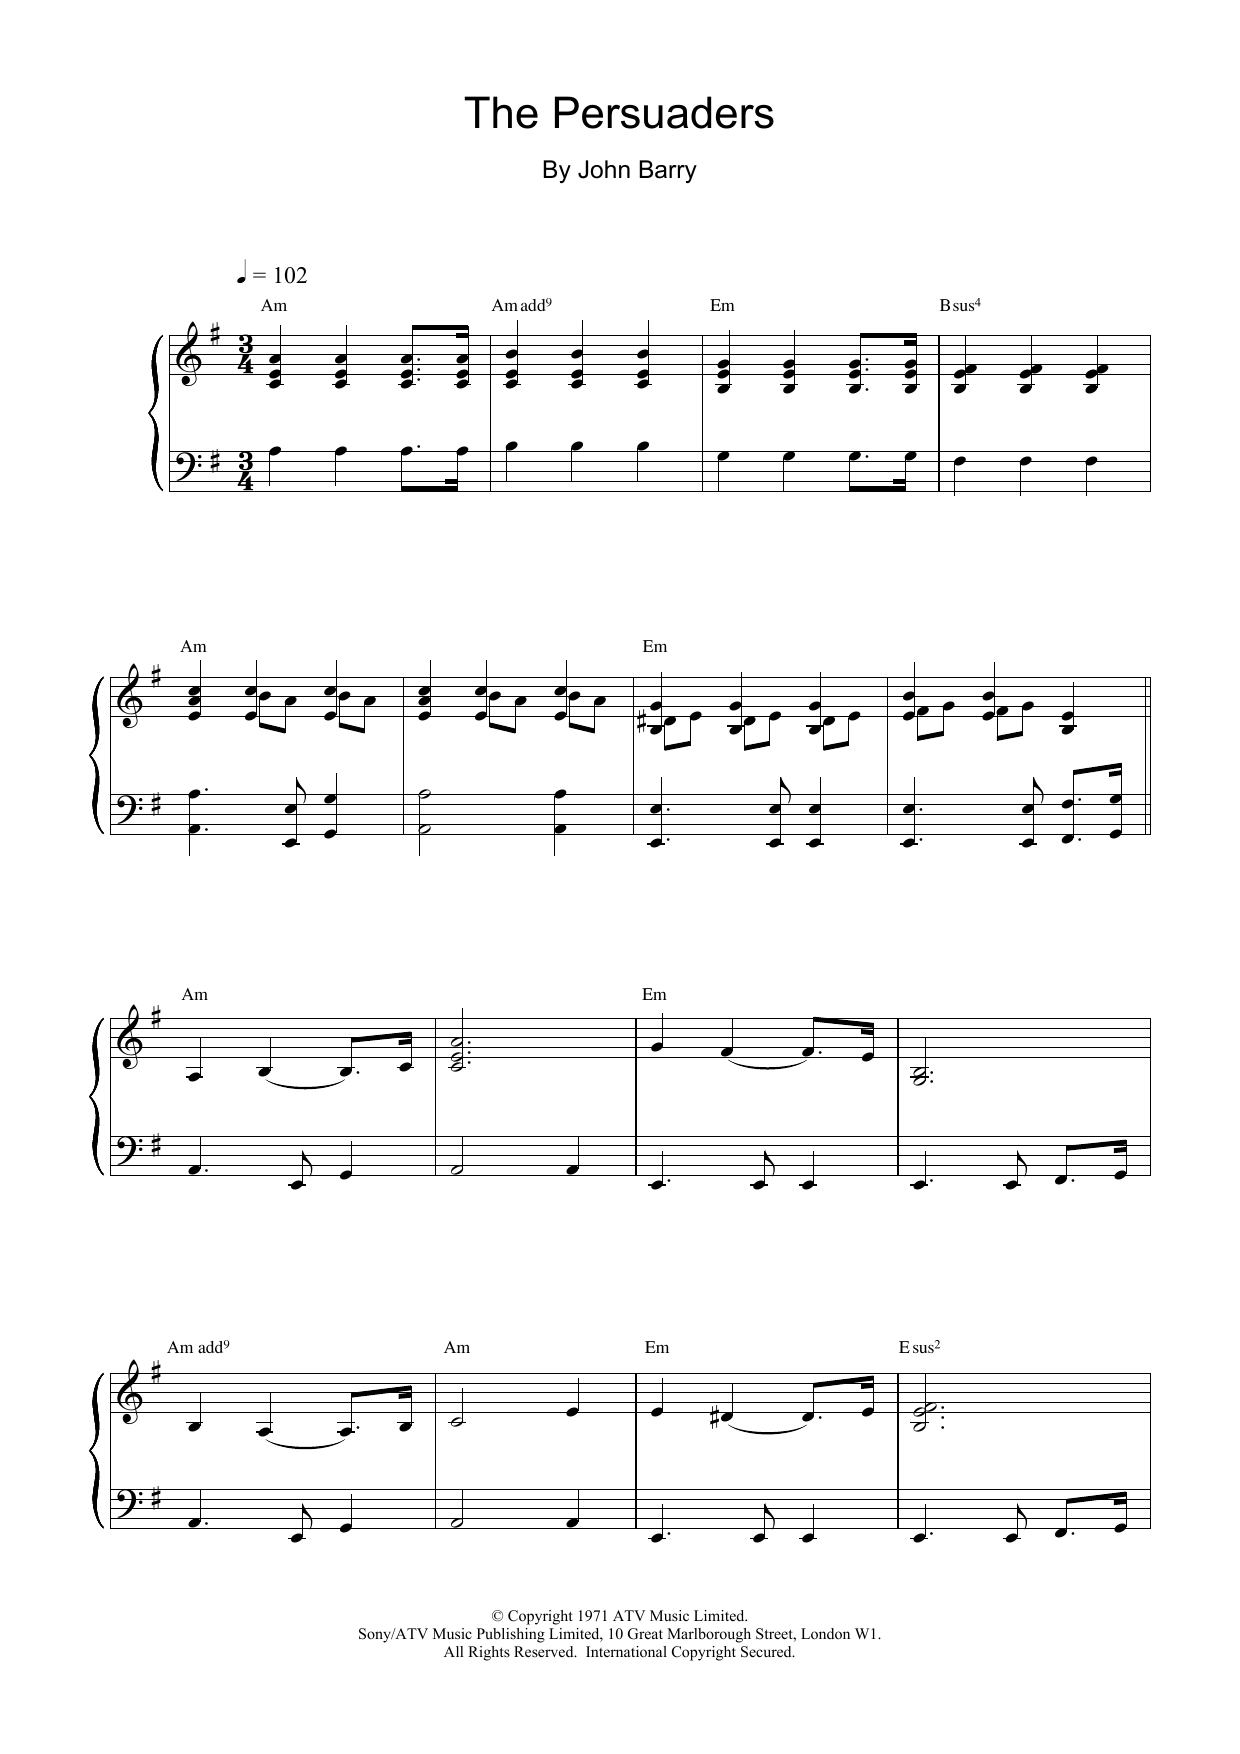 John Barry The Persuaders sheet music notes and chords. Download Printable PDF.